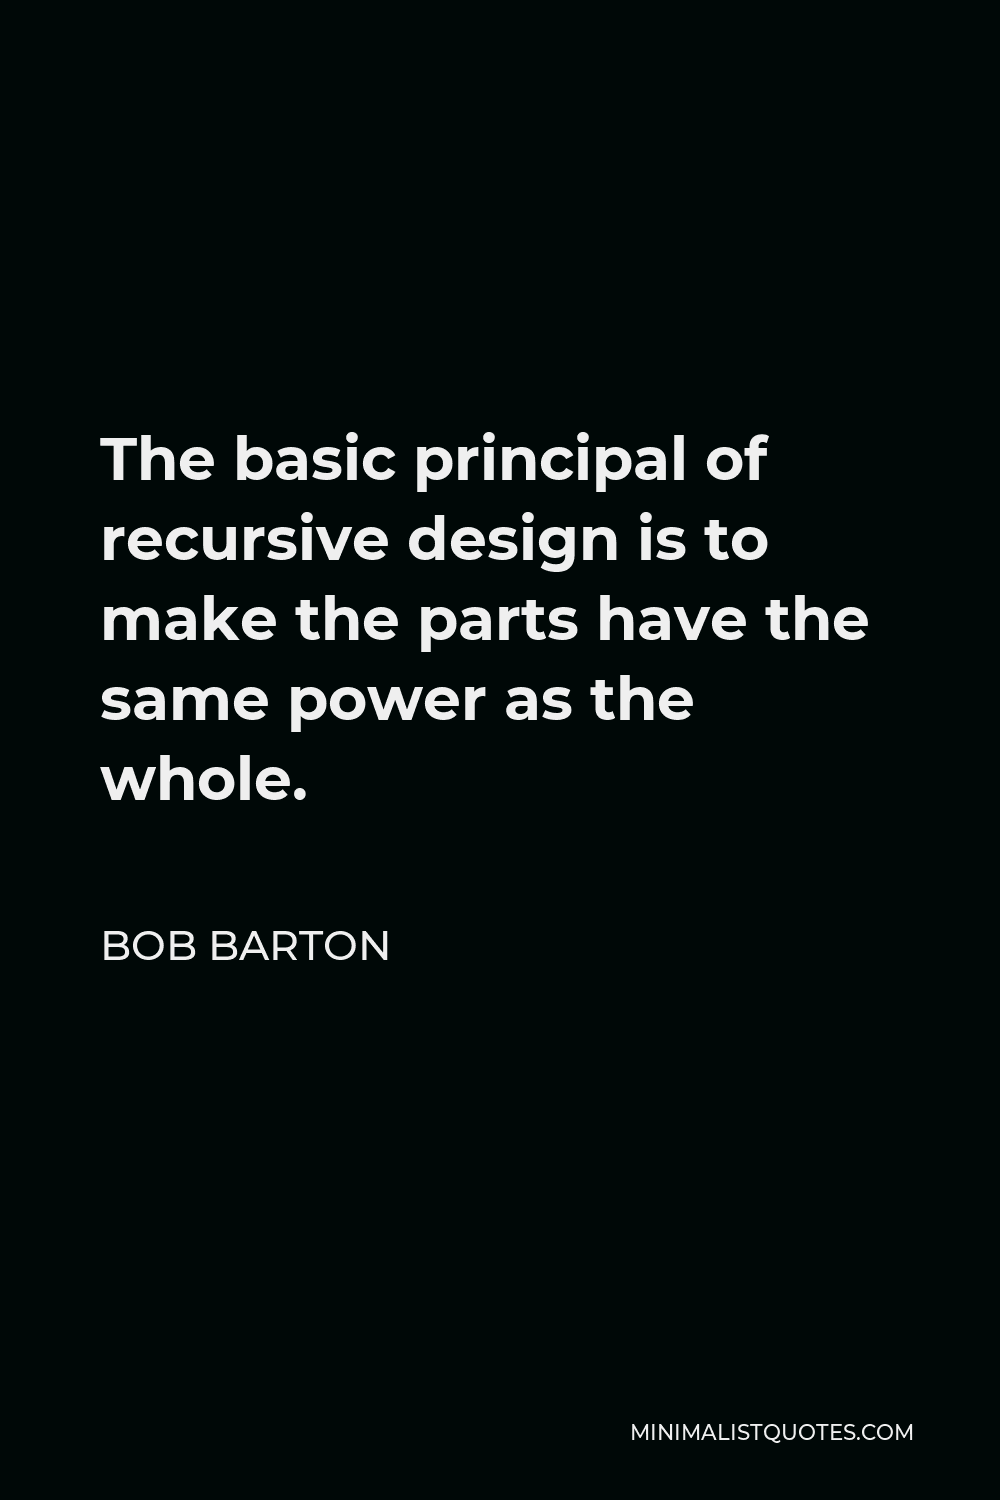 Bob Barton Quote - The basic principal of recursive design is to make the parts have the same power as the whole.